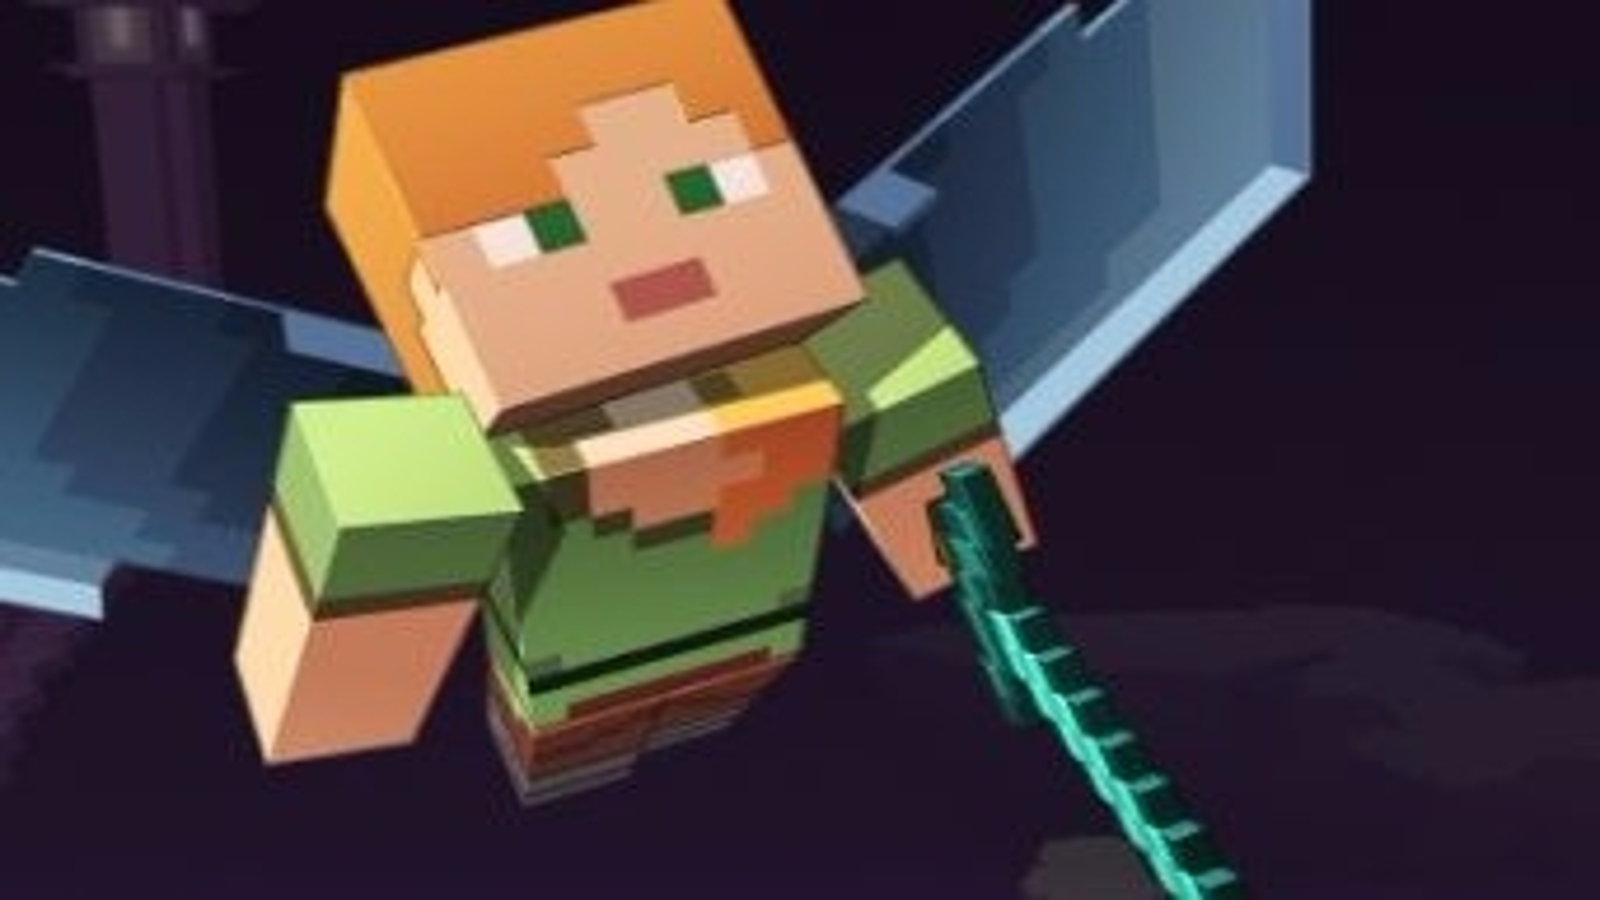 Minecraft update 1.9 has completely changed combat